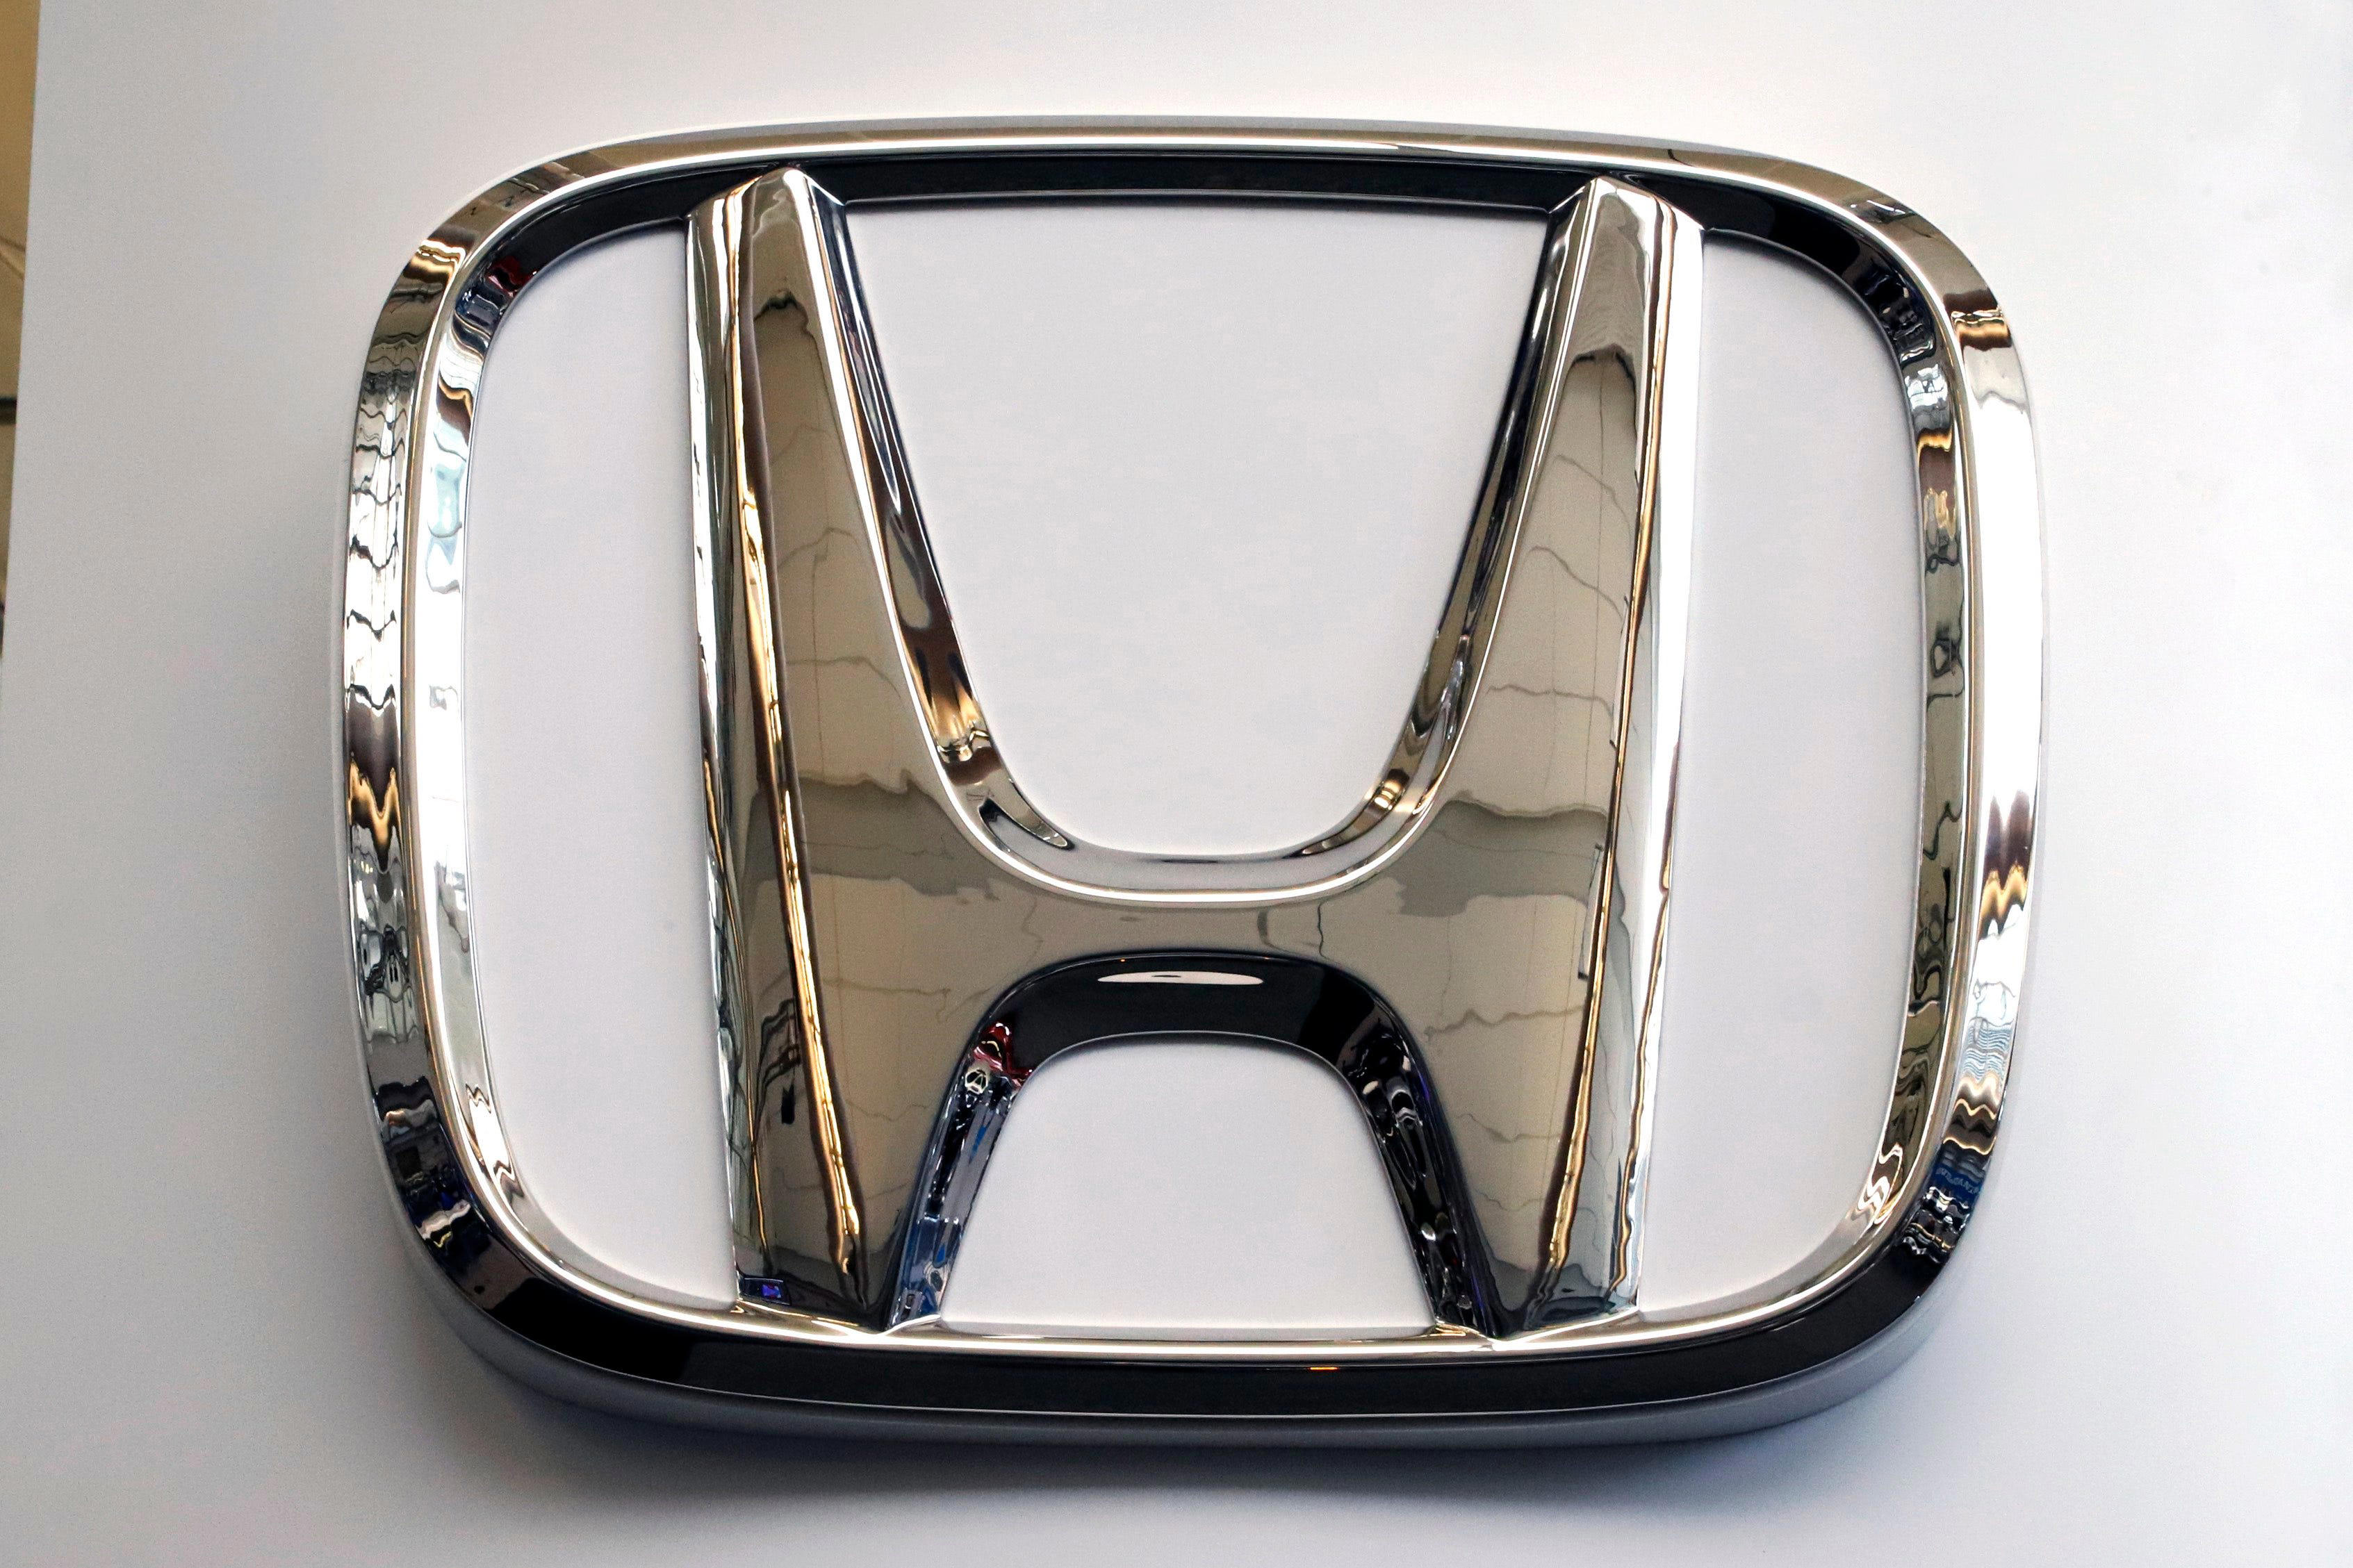 Honda recalls 2023 Check the full list of models recalled this year